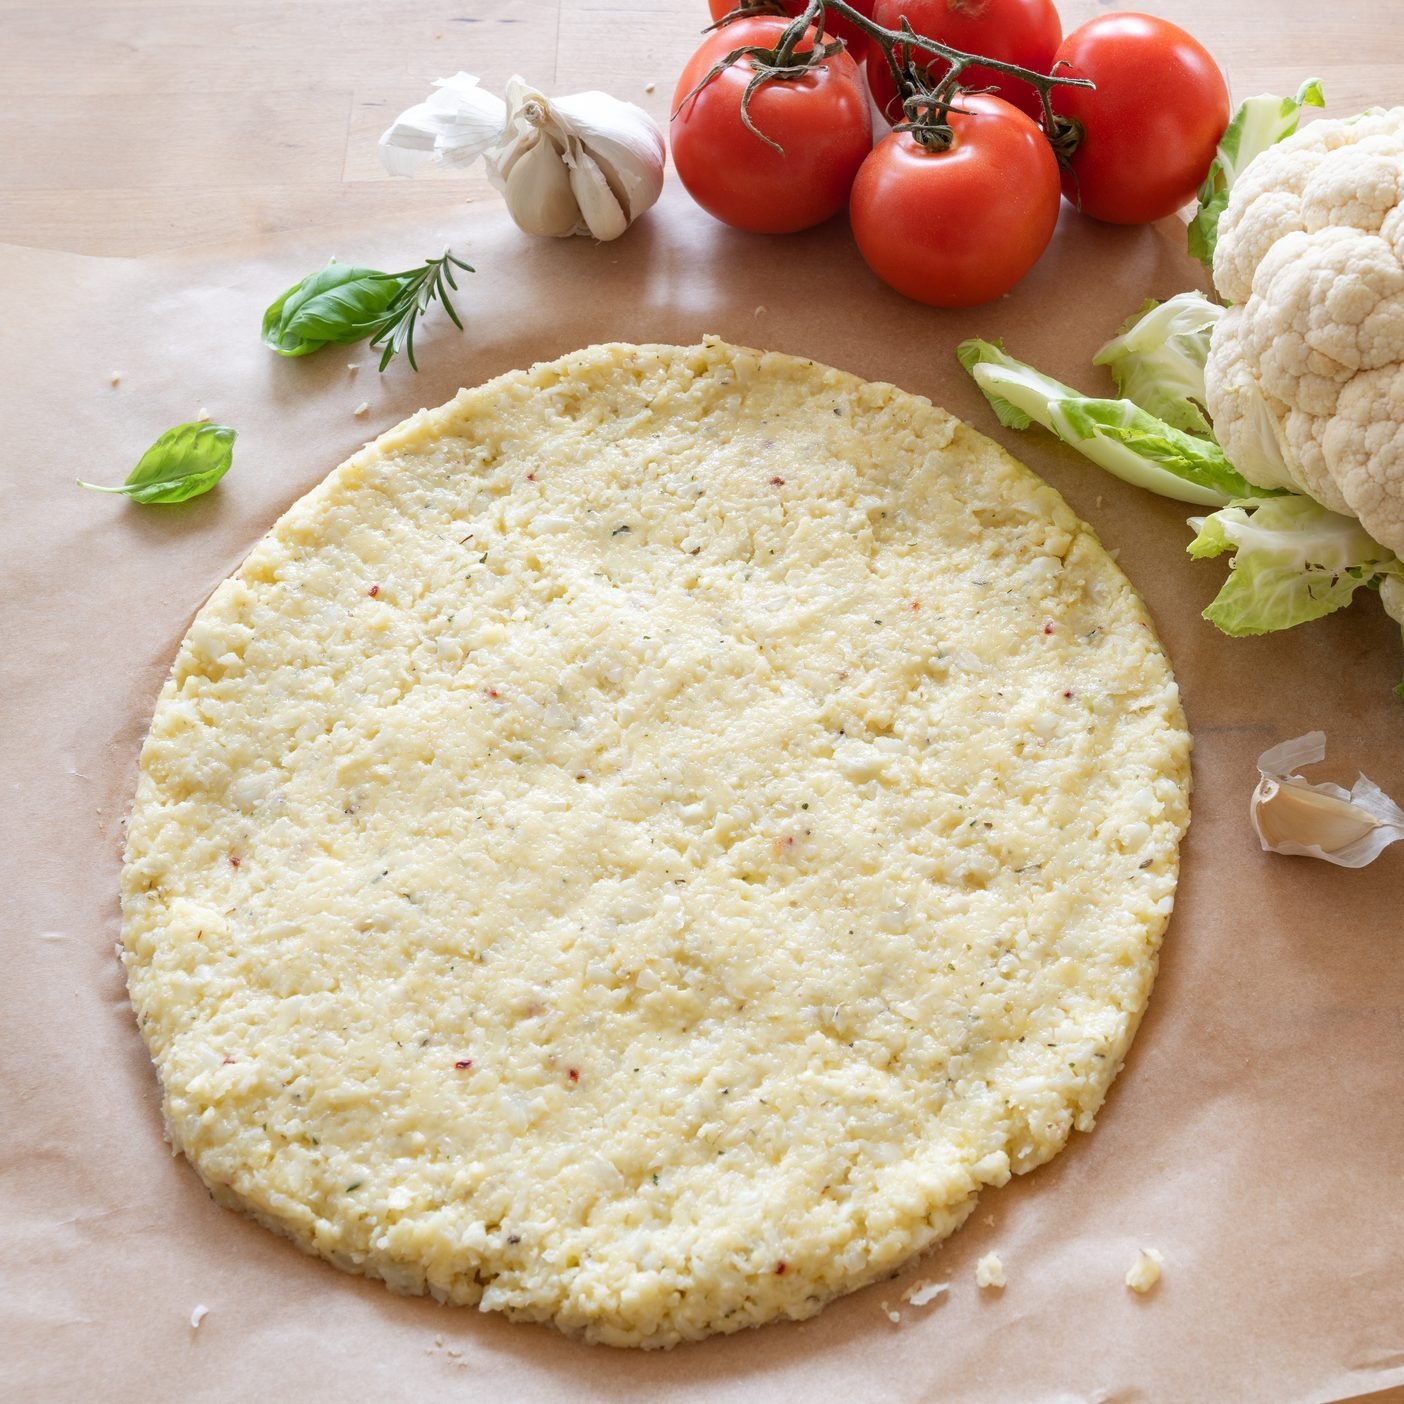 Shop the 5 Best Cauliflower Pizza Crusts, Recommended by Registered Dietitians